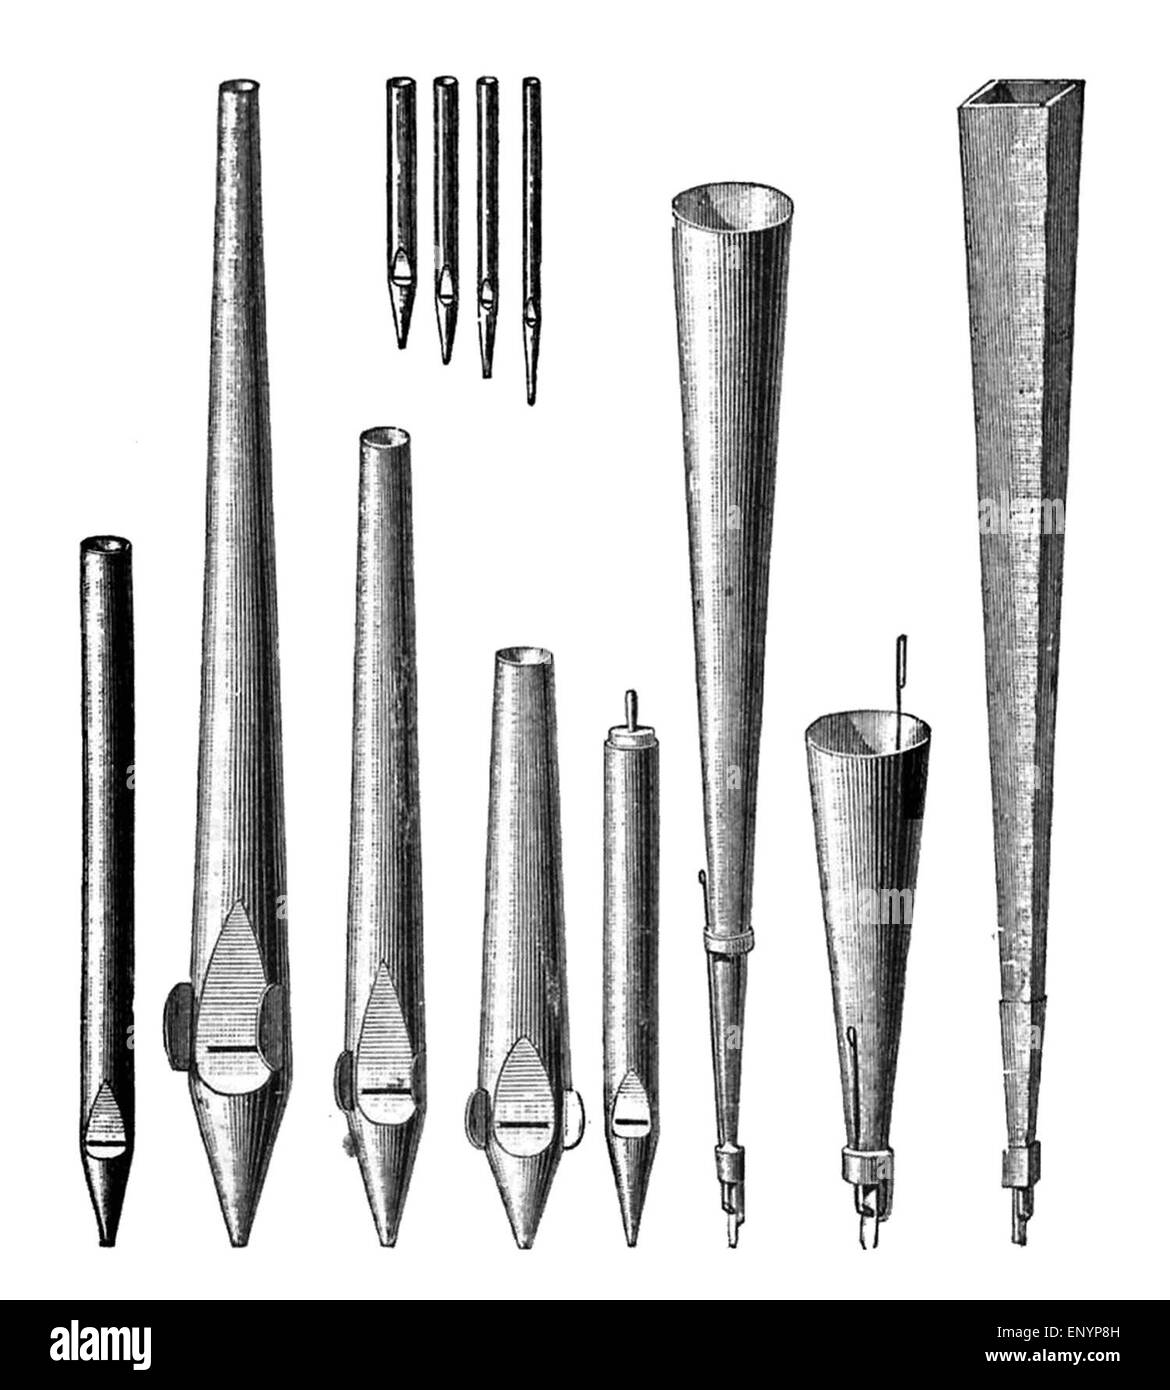 1800s drawing showing different types of organ pipes or stops. The little pipes on the top are identified as 'Mixture (4 ranks).'  The remainder of the pipes from left to right are identified as Principal (4 feet), Spitz-flöte (8 and 4 feet), Twelfth (3 feet), Cornet, Flute (8 and 4 feet), Trumpet (8 and 4 feet), Vox humana (8 feet), Bombarde or double reed (16 and 8 feet) Stock Photo